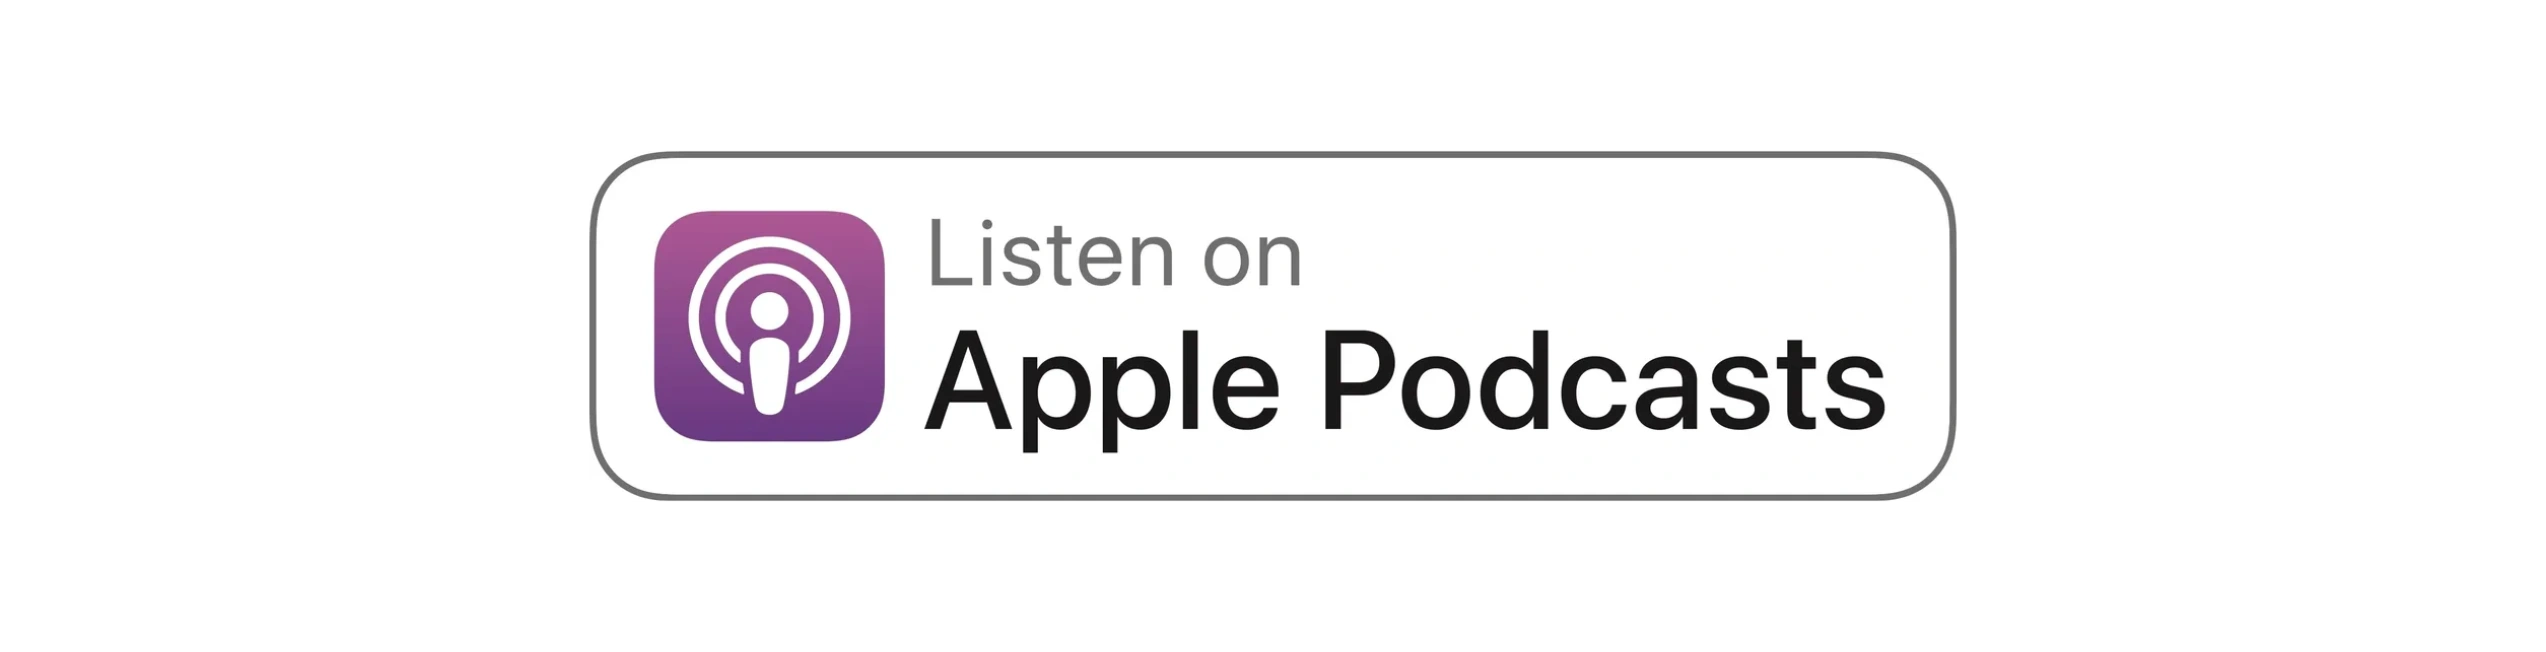 Podcast on Apple Podcast